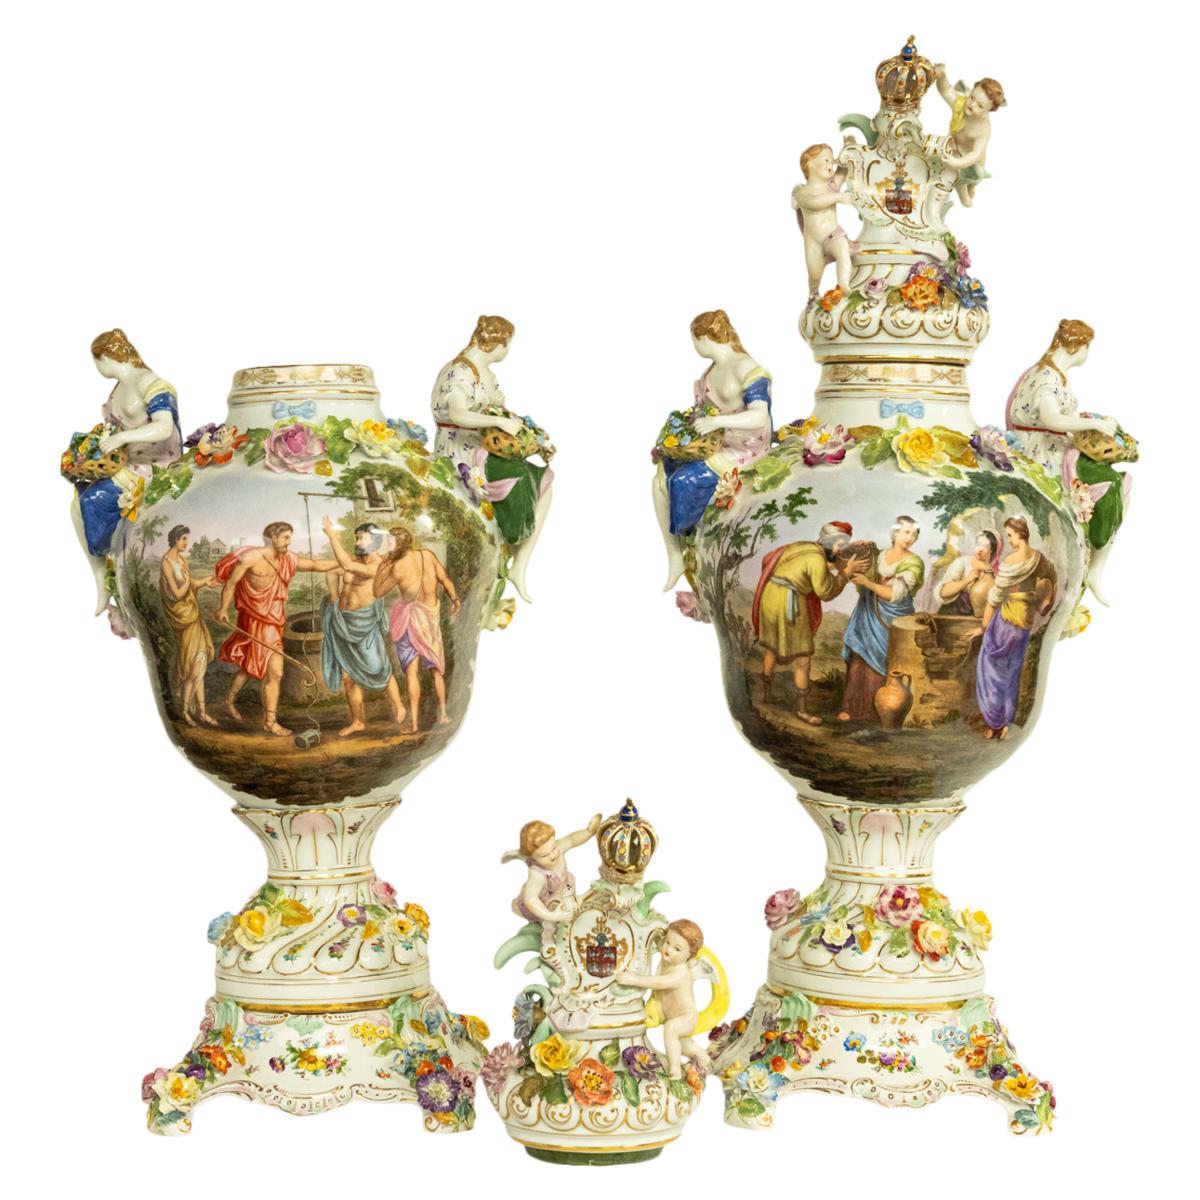 A very fine & monumental pair of late 19th century Porcelain lidded urns on pedestals by Carl Thieme (Potschappel) circa 1880.
The urns are in three three sections & are very lavishly decorated, each lid having a gilded finial modeled as a coronet,